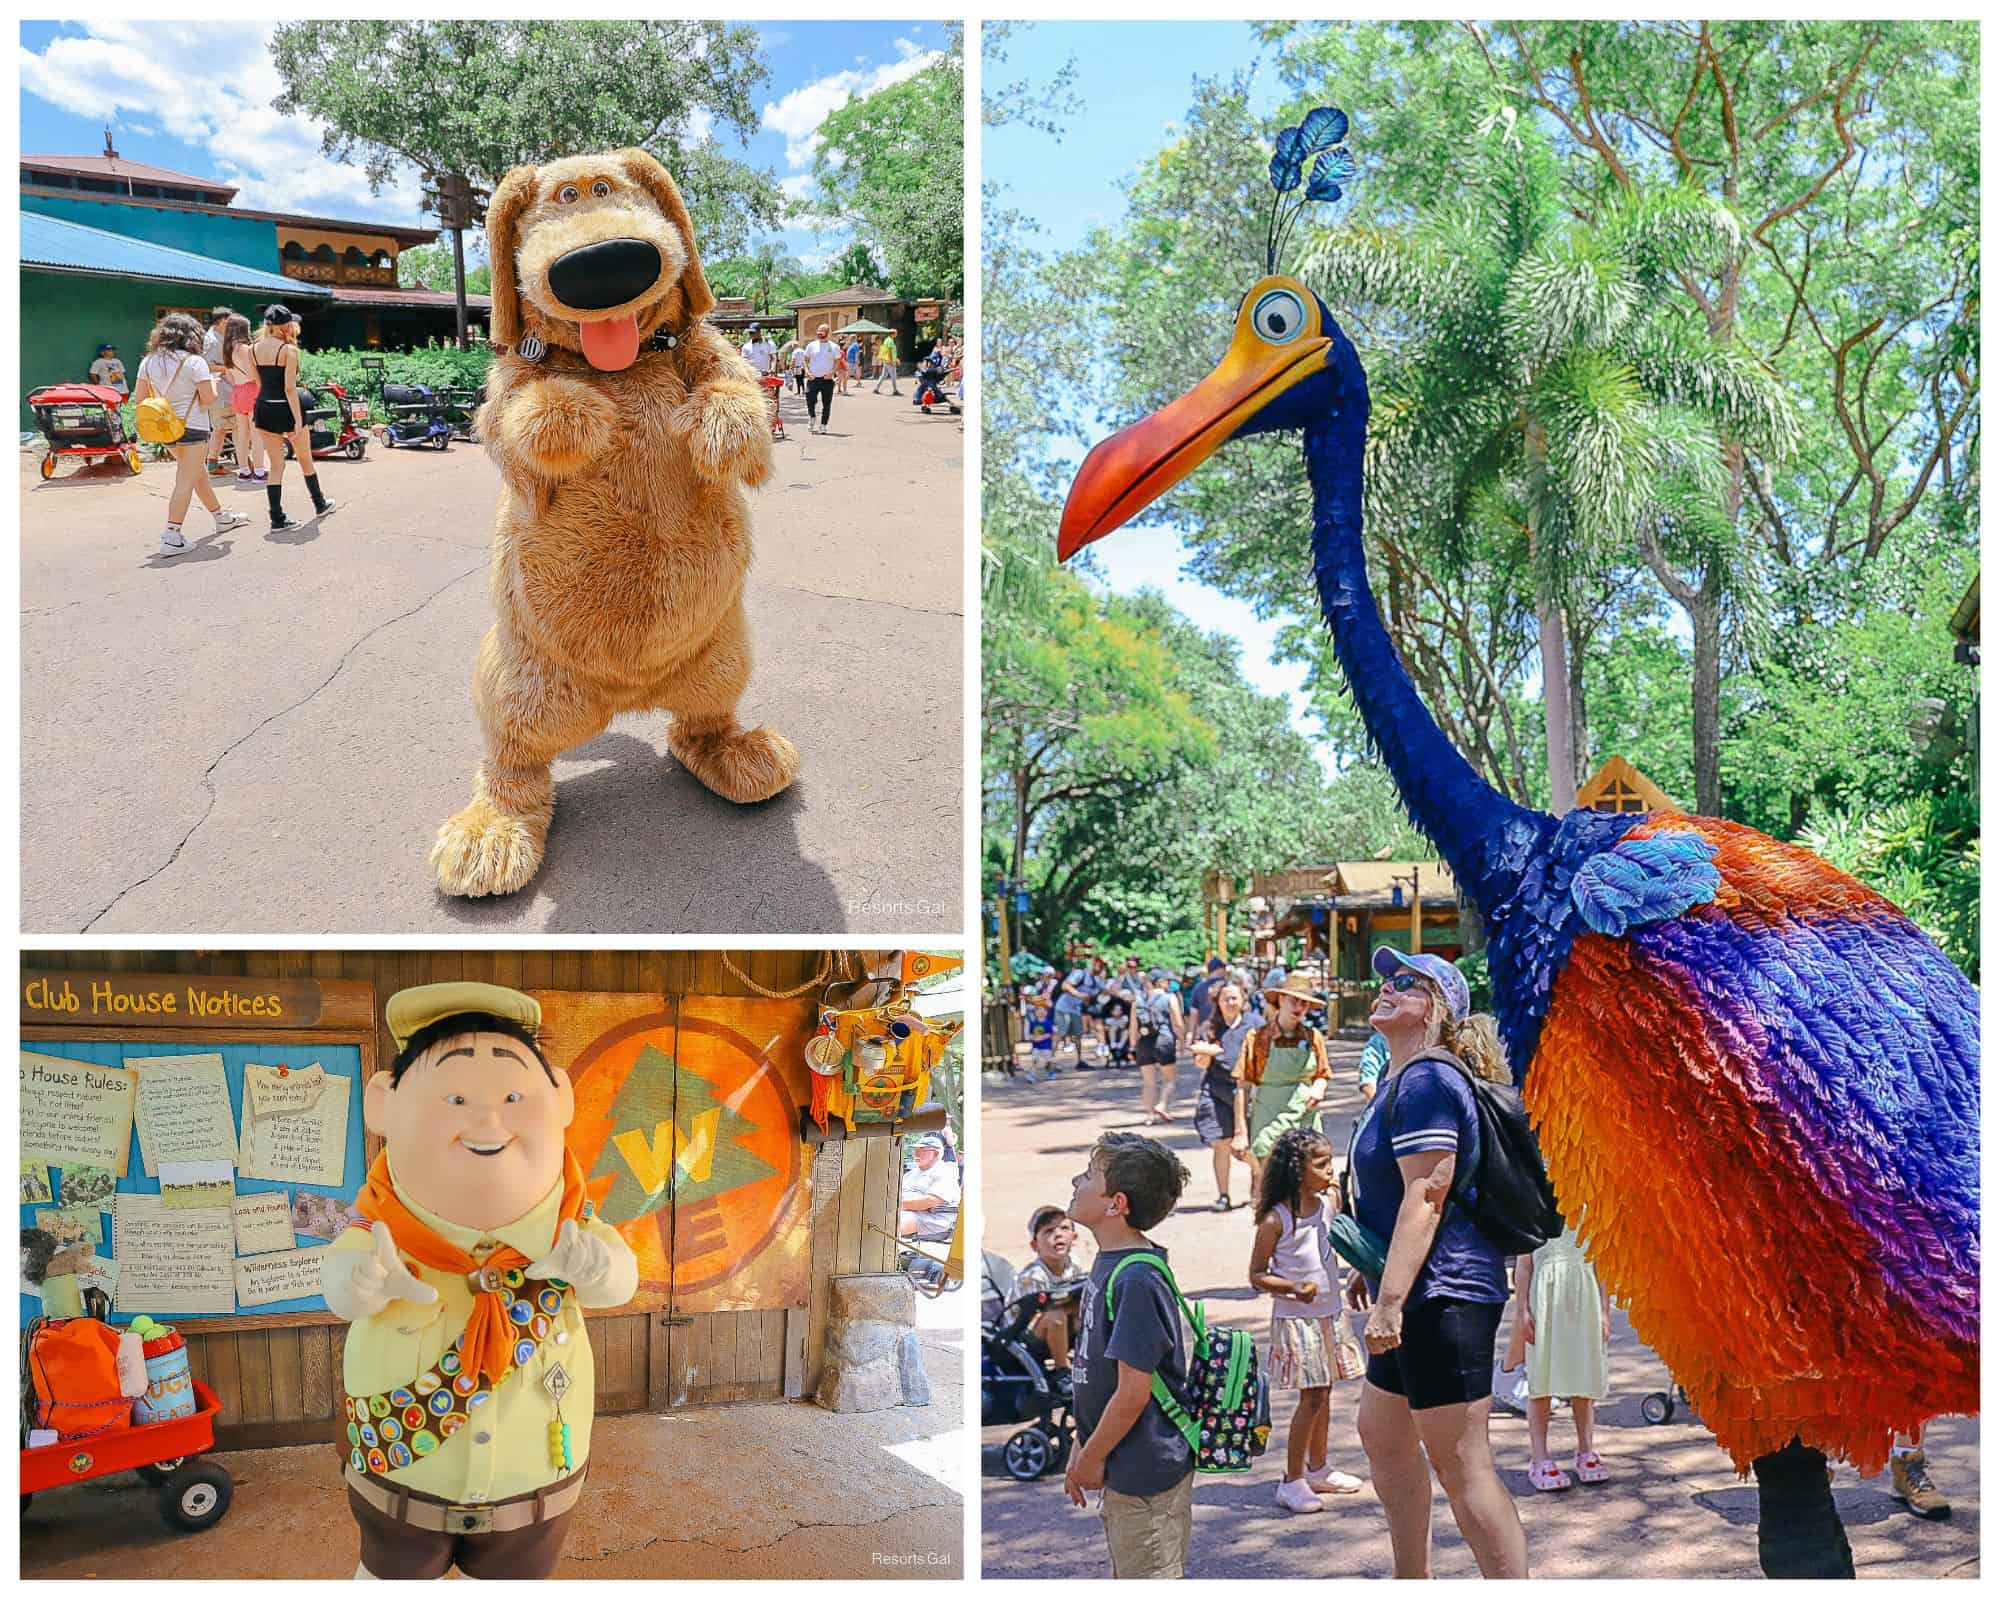 How to Find 3 Characters From Disney Pixar’s ‘Up’ at Disney’s Animal Kingdom